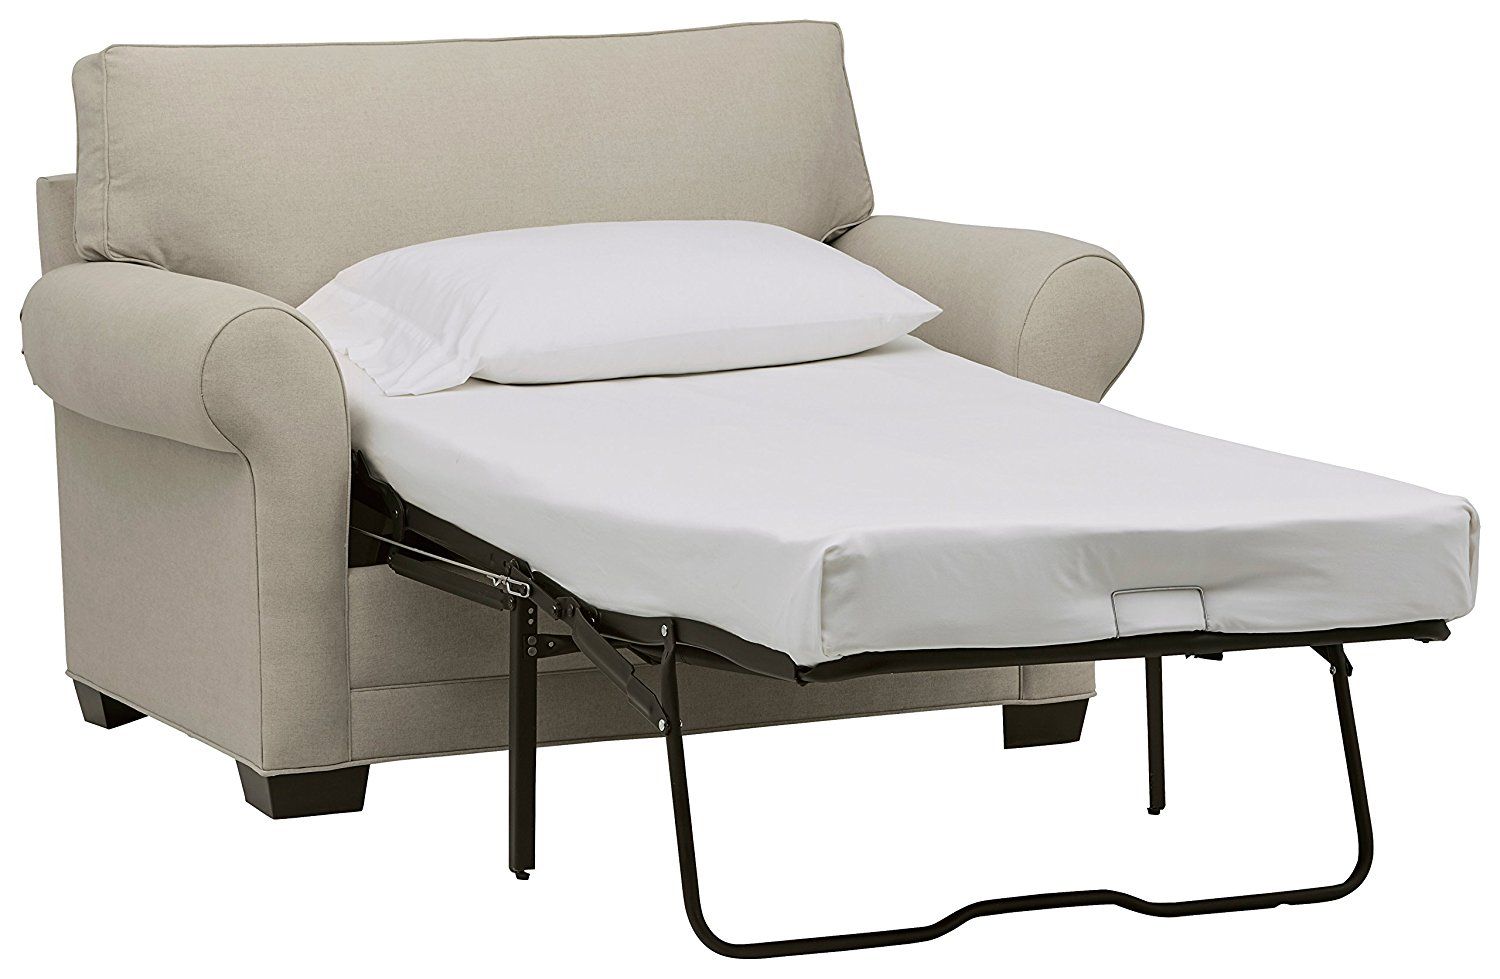 5 Best Chair Beds For Adults – Costculator Inside Convertible Light Gray Chair Beds (View 15 of 20)